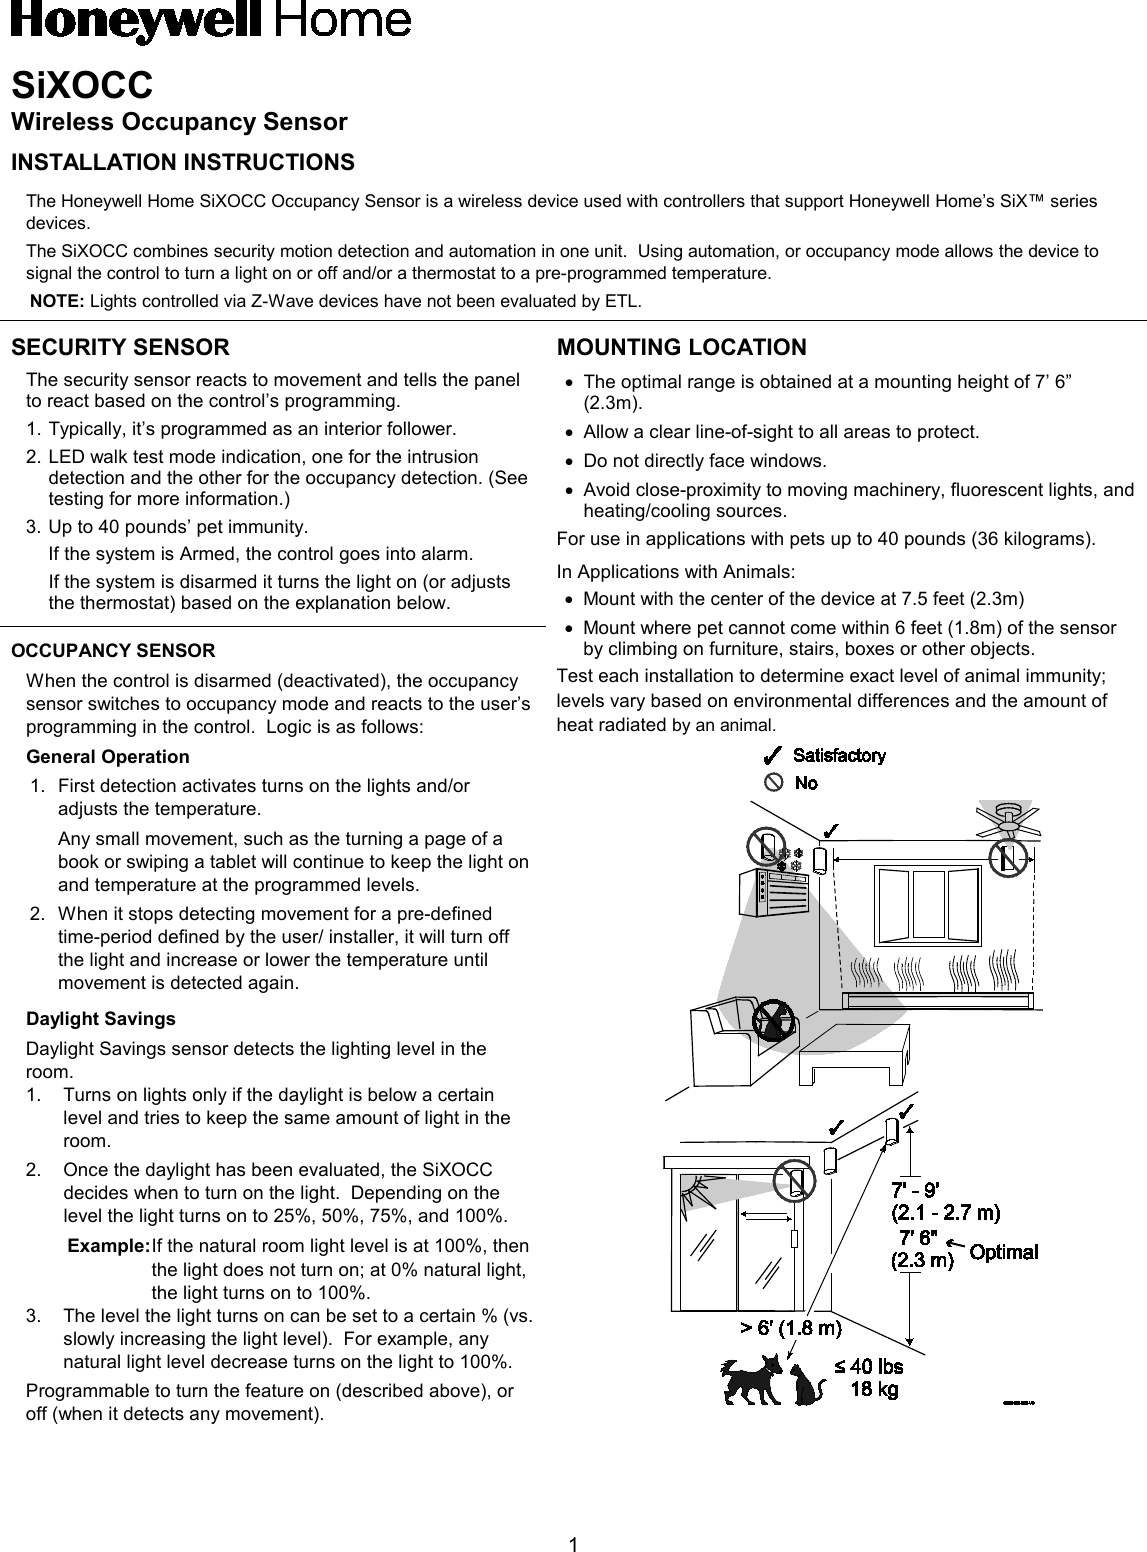  1 SiXOCC Wireless Occupancy Sensor INSTALLATION INSTRUCTIONS The Honeywell Home SiXOCC Occupancy Sensor is a wireless device used with controllers that support Honeywell Home’s SiX™ series devices.   The SiXOCC combines security motion detection and automation in one unit.  Using automation, or occupancy mode allows the device to signal the control to turn a light on or off and/or a thermostat to a pre-programmed temperature. NOTE: Lights controlled via Z-Wave devices have not been evaluated by ETL. SECURITY SENSOR The security sensor reacts to movement and tells the panel to react based on the control’s programming.   1. Typically, it’s programmed as an interior follower. 2. LED walk test mode indication, one for the intrusion detection and the other for the occupancy detection. (See testing for more information.)  3. Up to 40 pounds’ pet immunity.  If the system is Armed, the control goes into alarm.  If the system is disarmed it turns the light on (or adjusts the thermostat) based on the explanation below. MOUNTING LOCATION • The optimal range is obtained at a mounting height of 7’ 6” (2.3m).   • Allow a clear line-of-sight to all areas to protect. • Do not directly face windows. • Avoid close-proximity to moving machinery, fluorescent lights, and heating/cooling sources. For use in applications with pets up to 40 pounds (36 kilograms). In Applications with Animals: • Mount with the center of the device at 7.5 feet (2.3m) • Mount where pet cannot come within 6 feet (1.8m) of the sensor by climbing on furniture, stairs, boxes or other objects. Test each installation to determine exact level of animal immunity; levels vary based on environmental differences and the amount of heat radiated by an animal. OCCUPANCY SENSOR When the control is disarmed (deactivated), the occupancy sensor switches to occupancy mode and reacts to the user’s programming in the control.  Logic is as follows: General Operation 1. First detection activates turns on the lights and/or adjusts the temperature. Any small movement, such as the turning a page of a book or swiping a tablet will continue to keep the light on and temperature at the programmed levels. 2. When it stops detecting movement for a pre-defined time-period defined by the user/ installer, it will turn off the light and increase or lower the temperature until movement is detected again.  Daylight Savings  Daylight Savings sensor detects the lighting level in the room. 1. Turns on lights only if the daylight is below a certain level and tries to keep the same amount of light in the room. 2. Once the daylight has been evaluated, the SiXOCC decides when to turn on the light.  Depending on the level the light turns on to 25%, 50%, 75%, and 100%. Example: If the natural room light level is at 100%, then the light does not turn on; at 0% natural light, the light turns on to 100%. 3. The level the light turns on can be set to a certain % (vs. slowly increasing the light level).  For example, any natural light level decrease turns on the light to 100%. Programmable to turn the feature on (described above), or off (when it detects any movement). 